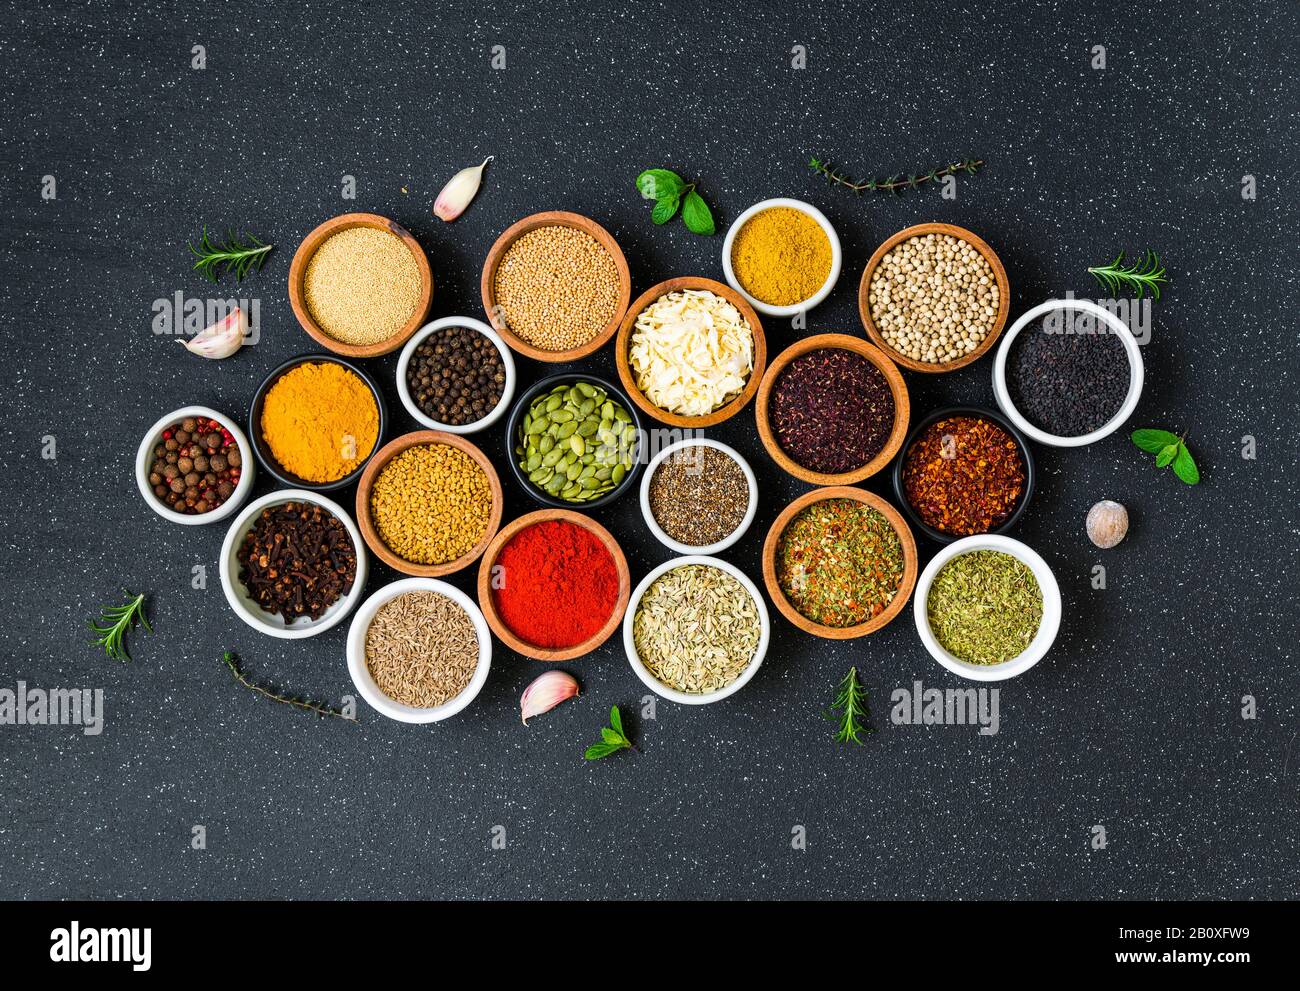 Variety of colorful spices, herbs, and seeds on black stone background. Stock Photo